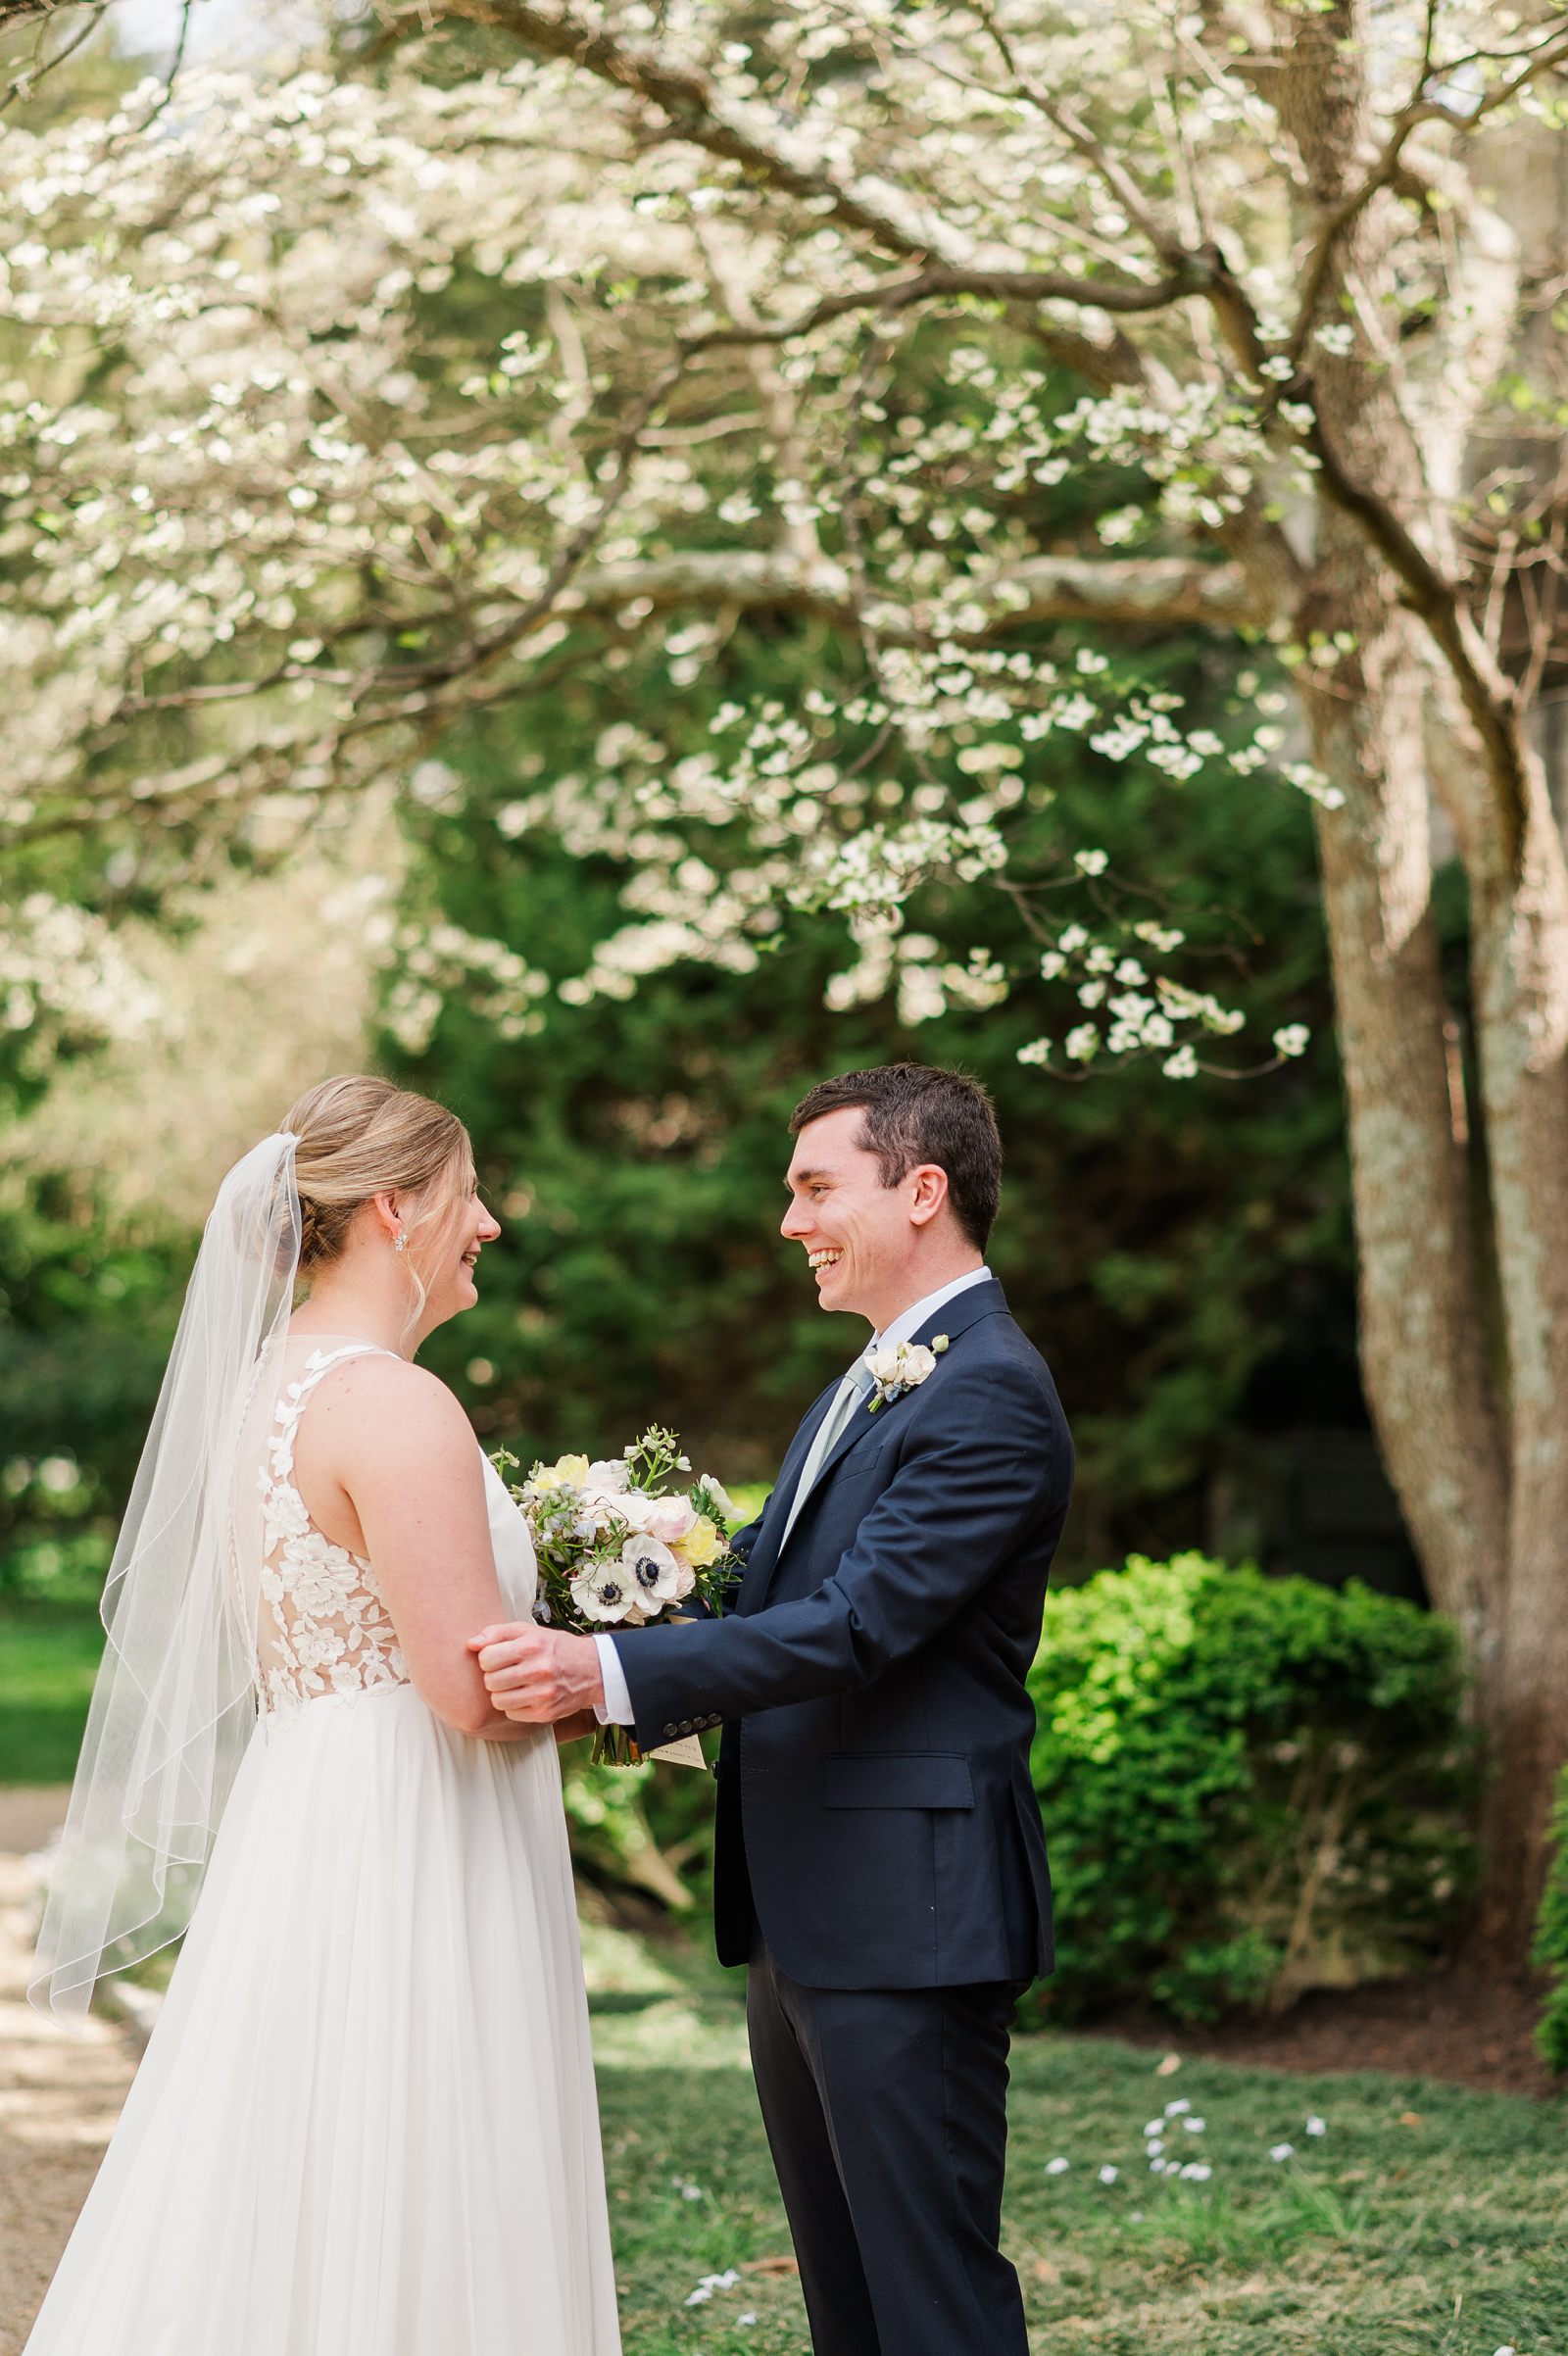 Emotional First Look at an Intimate Virginia House Wedding by Richmond Wedding Photographer Kailey Brianne Photography.